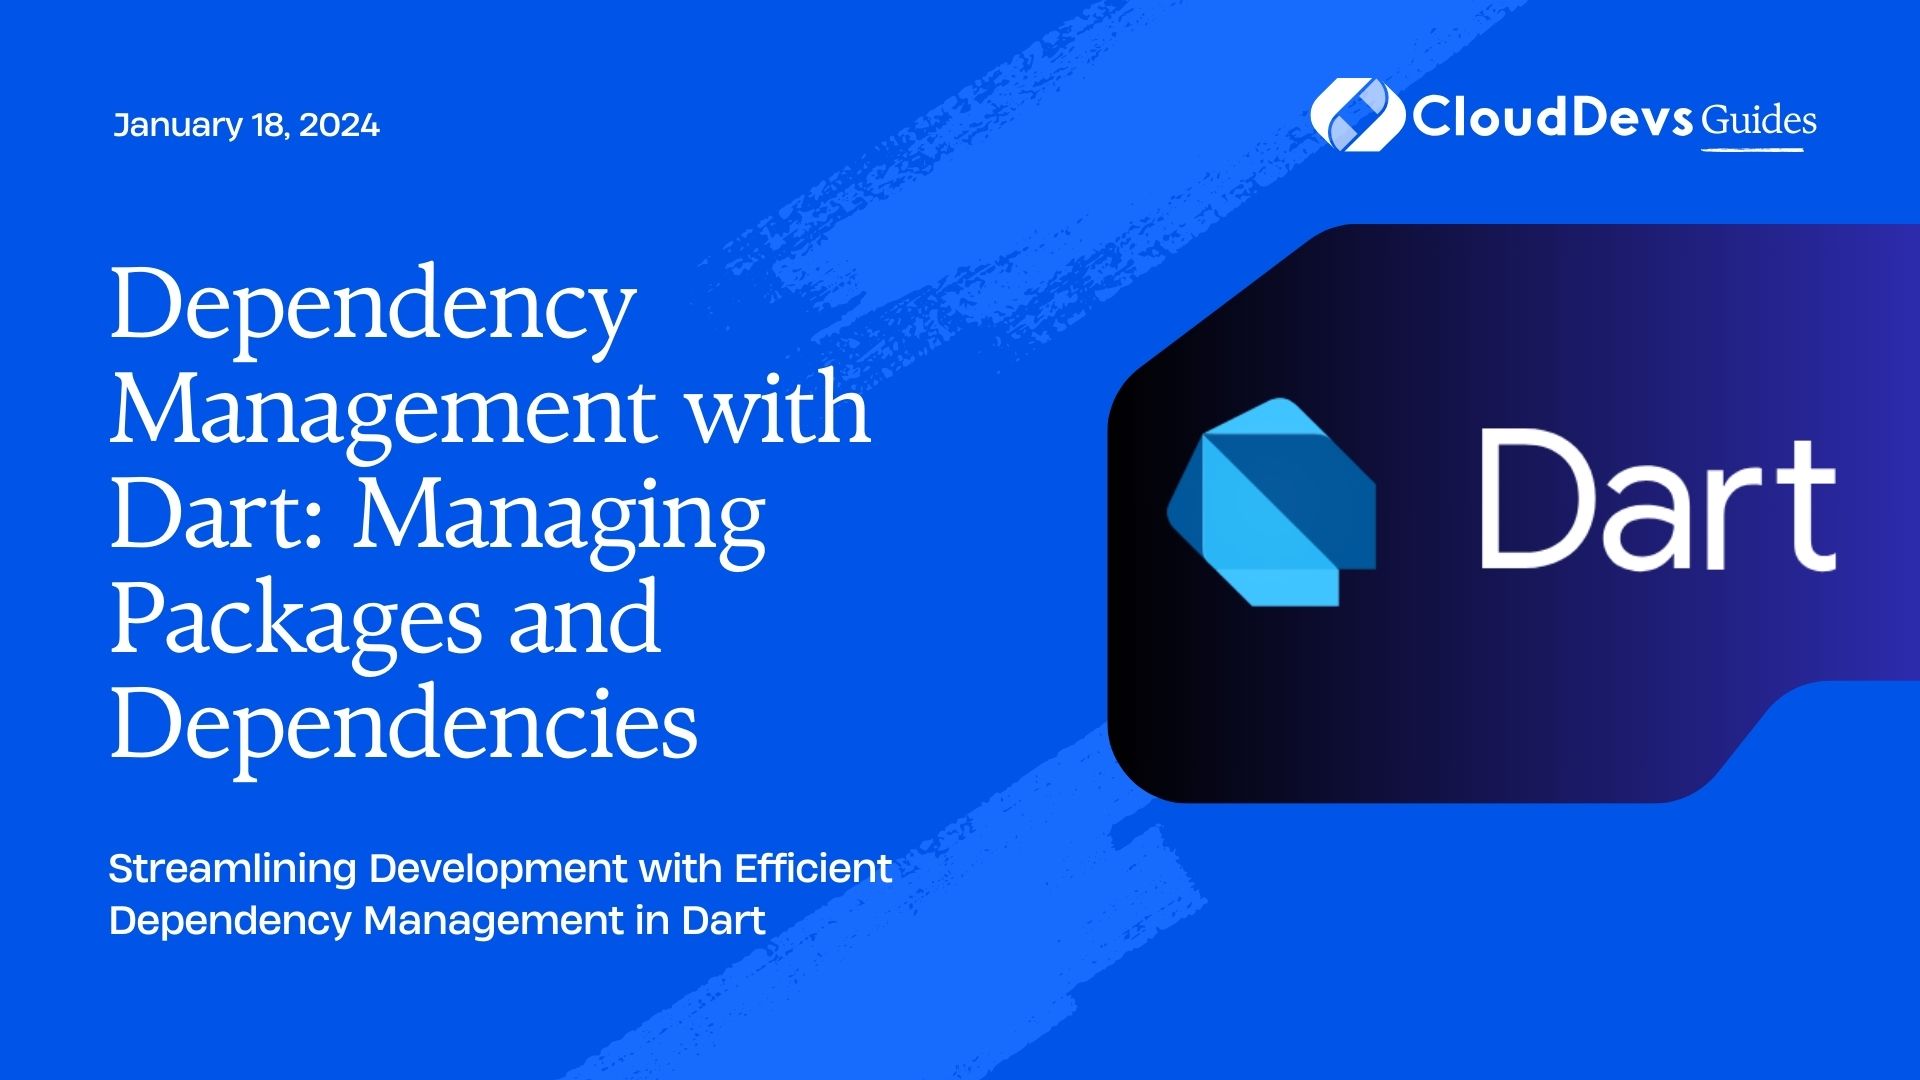 Dependency Management with Dart: Managing Packages and Dependencies